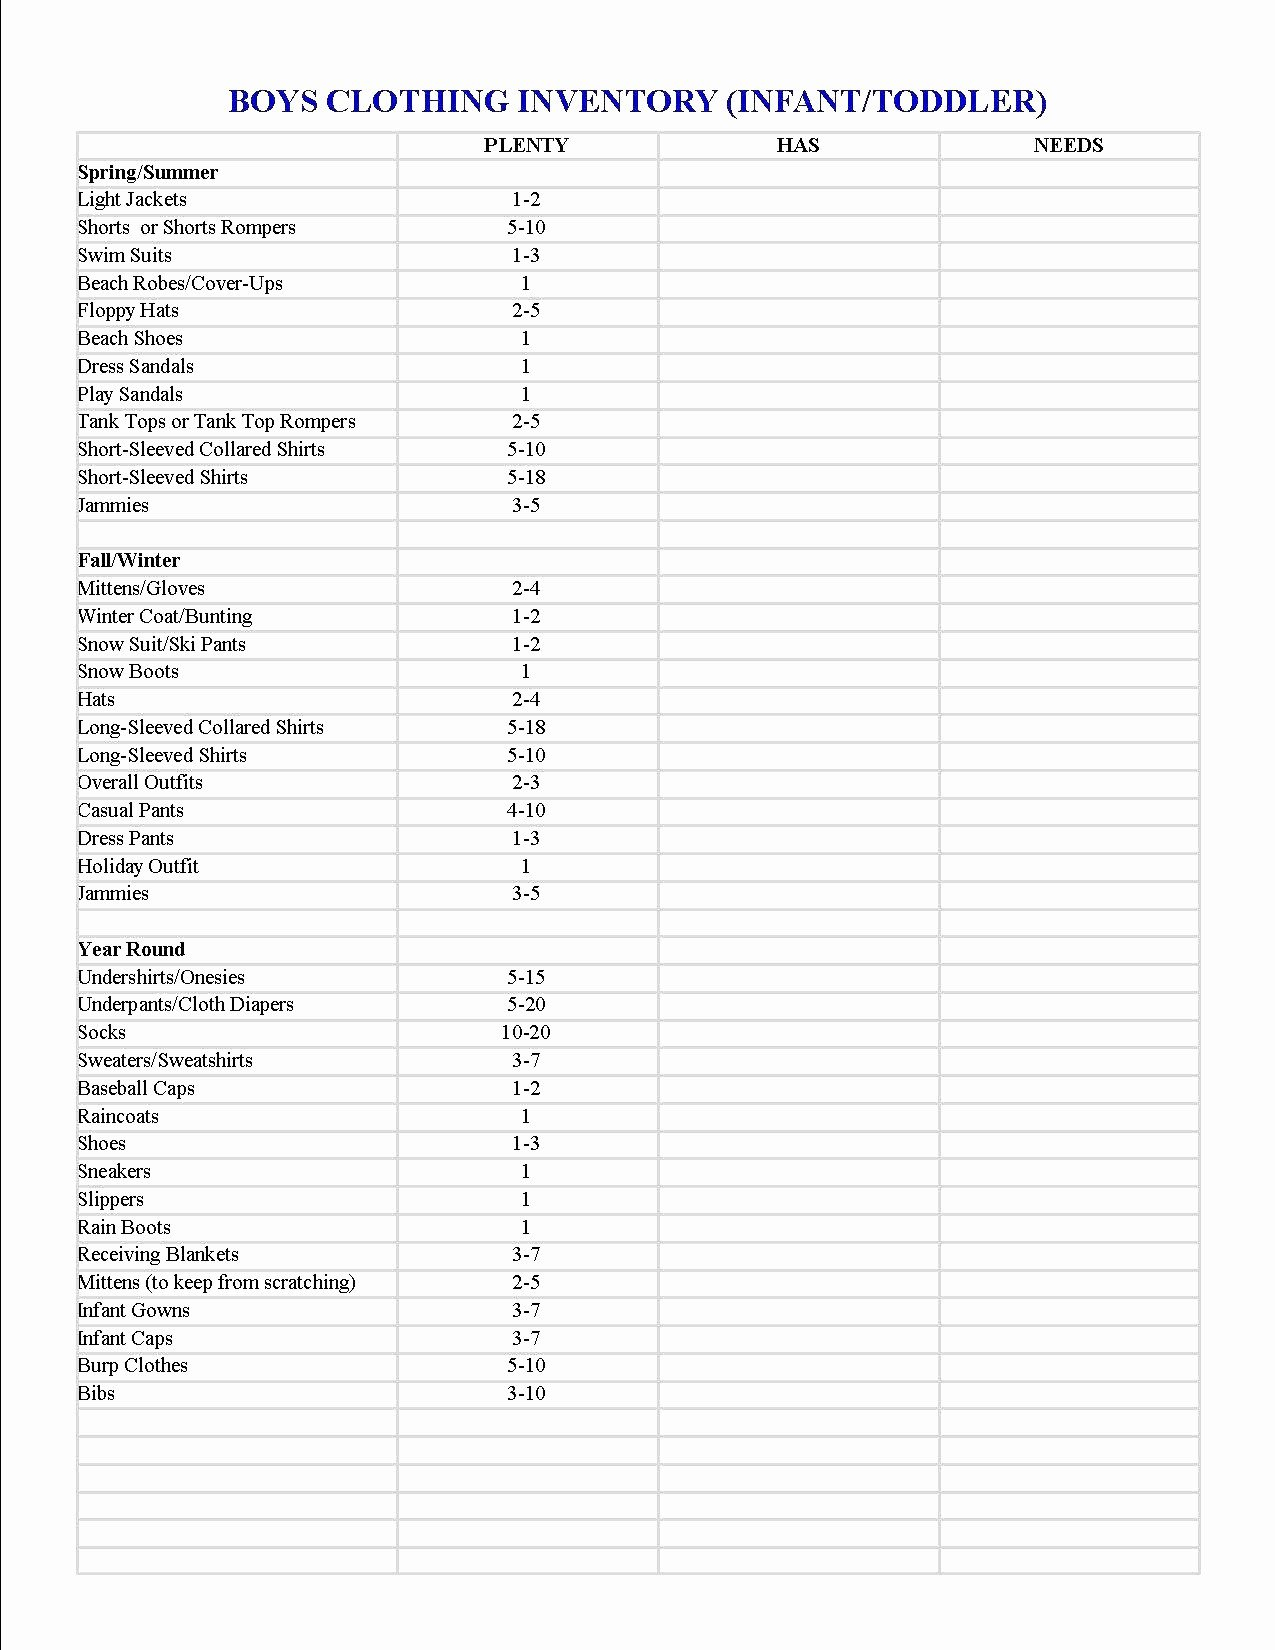 Donation Spreadsheet Goodwill Of Donation Spreadsheet Template Excel ... In Goodwill Donation Spreadsheet Template